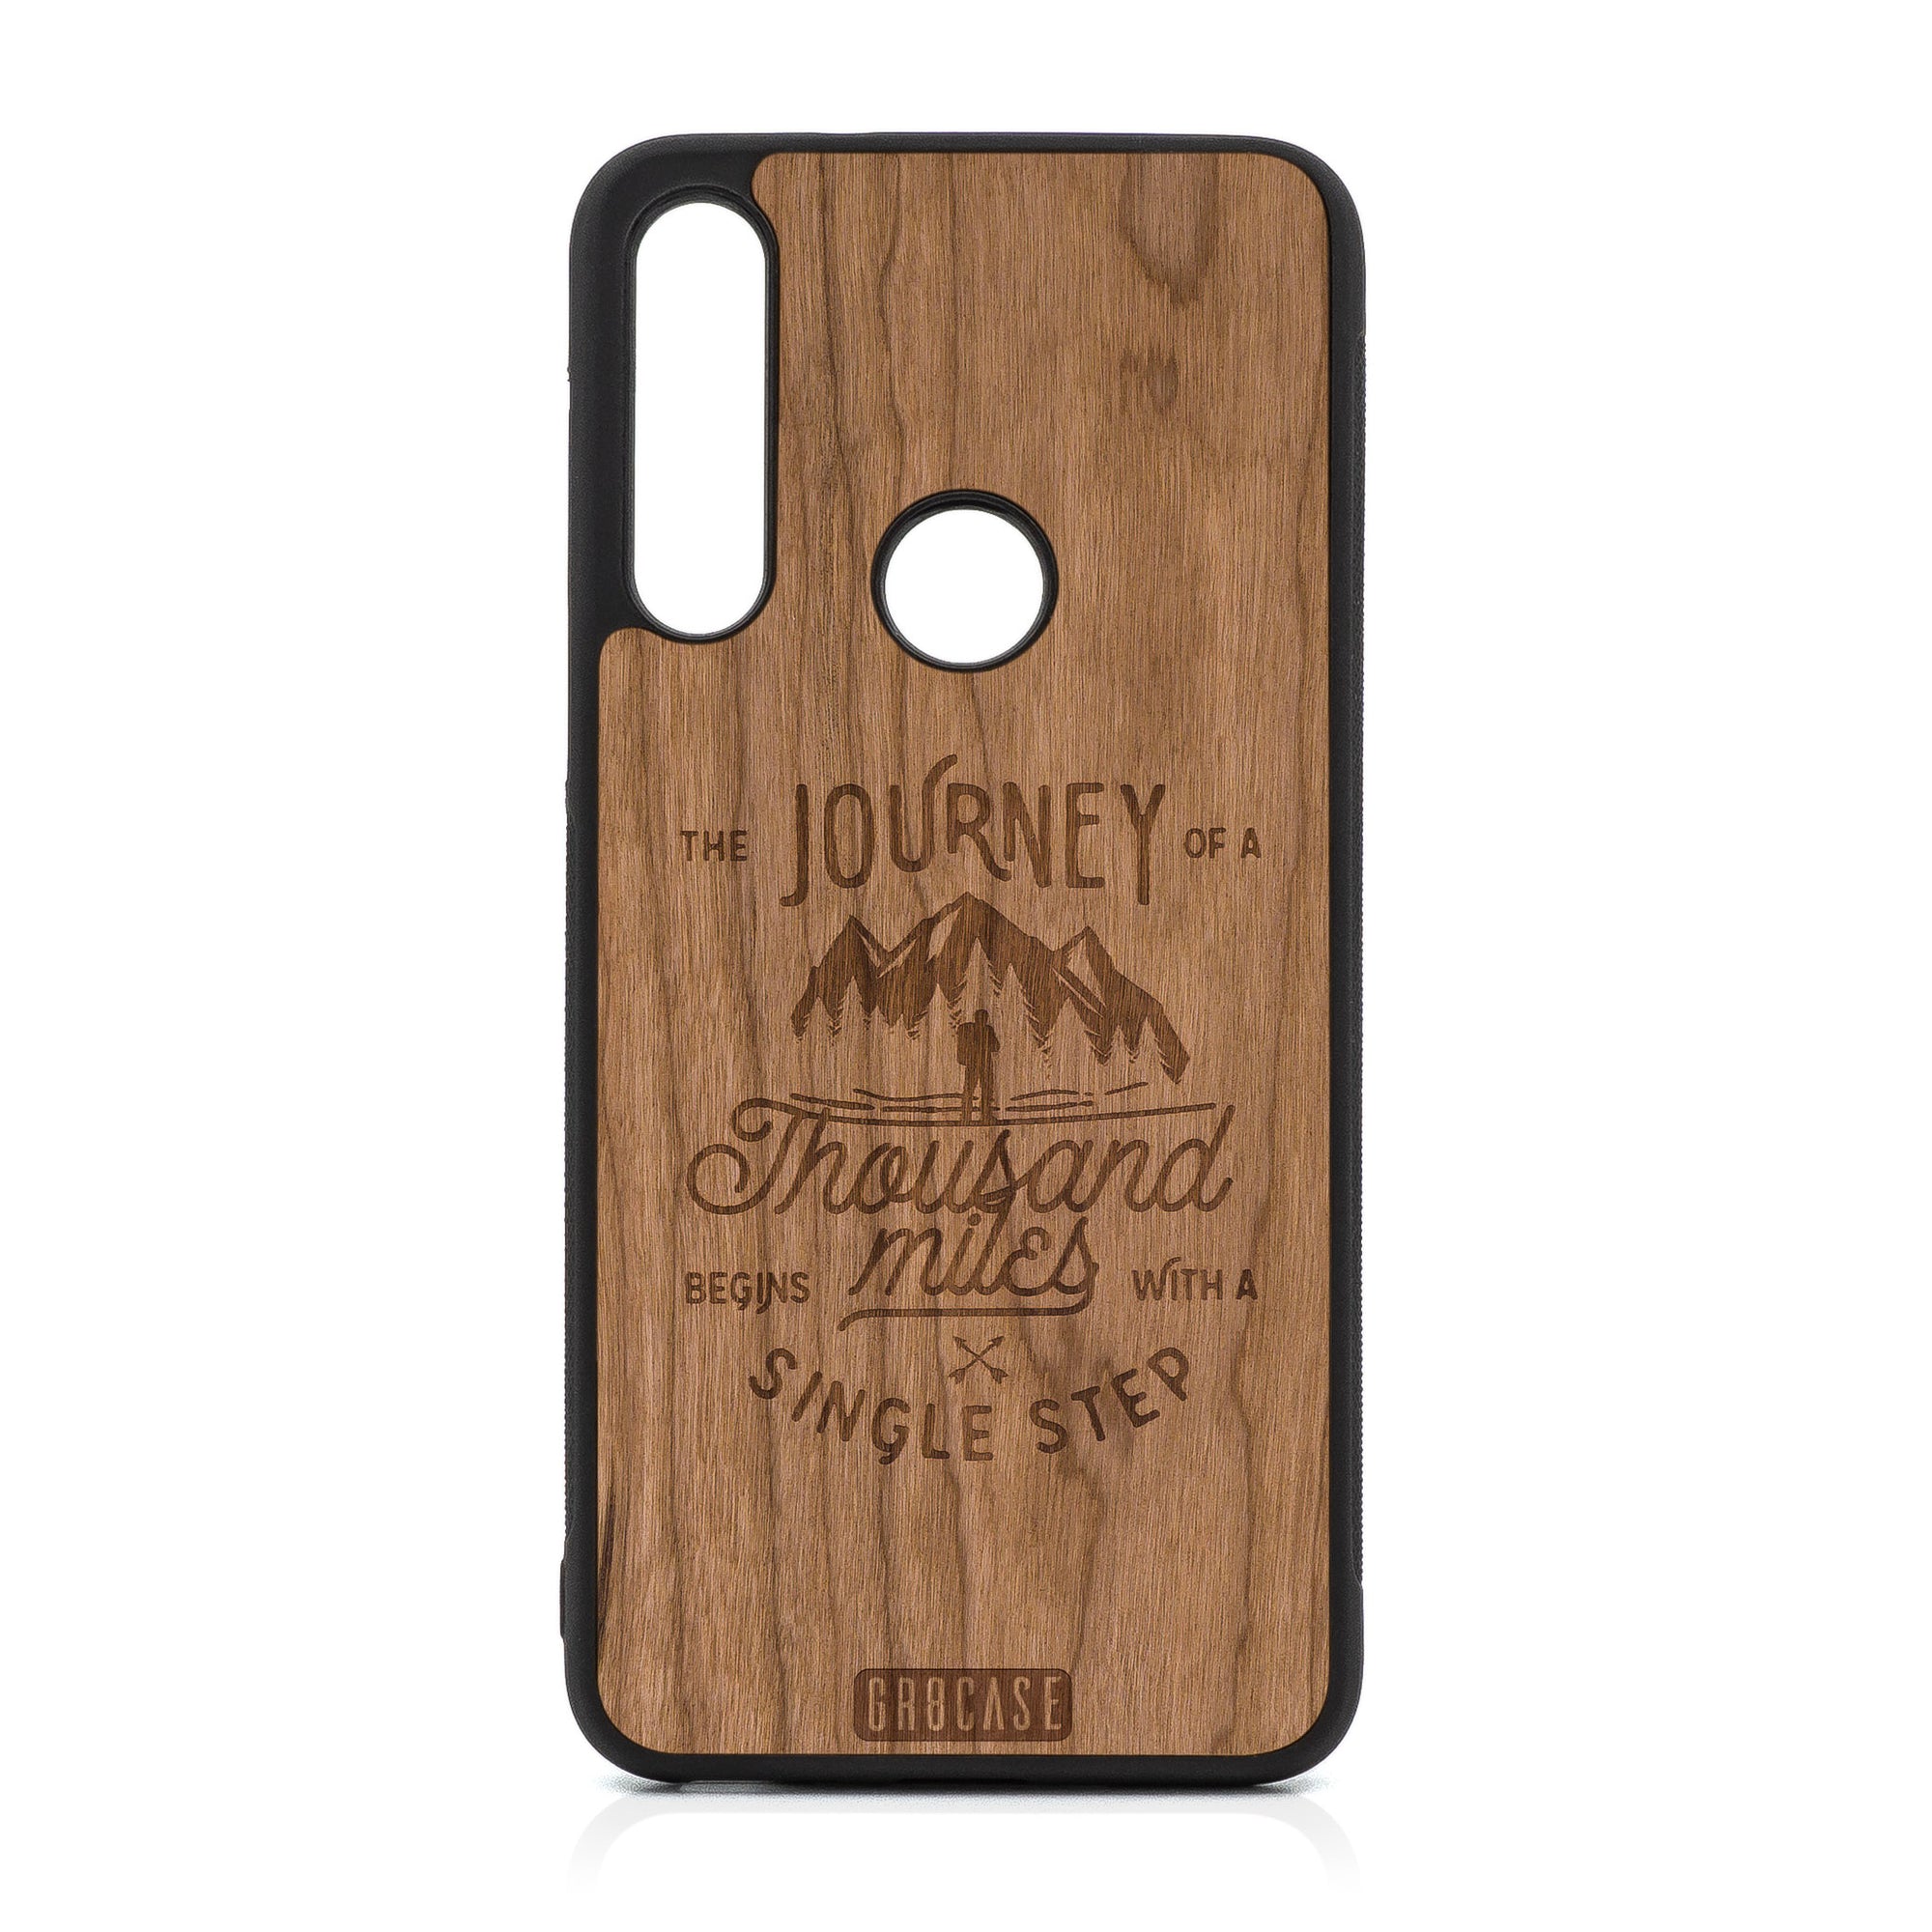 The Journey Of A Thousand Miles Begins With A Single Step Design Wood Case For Moto G Fast